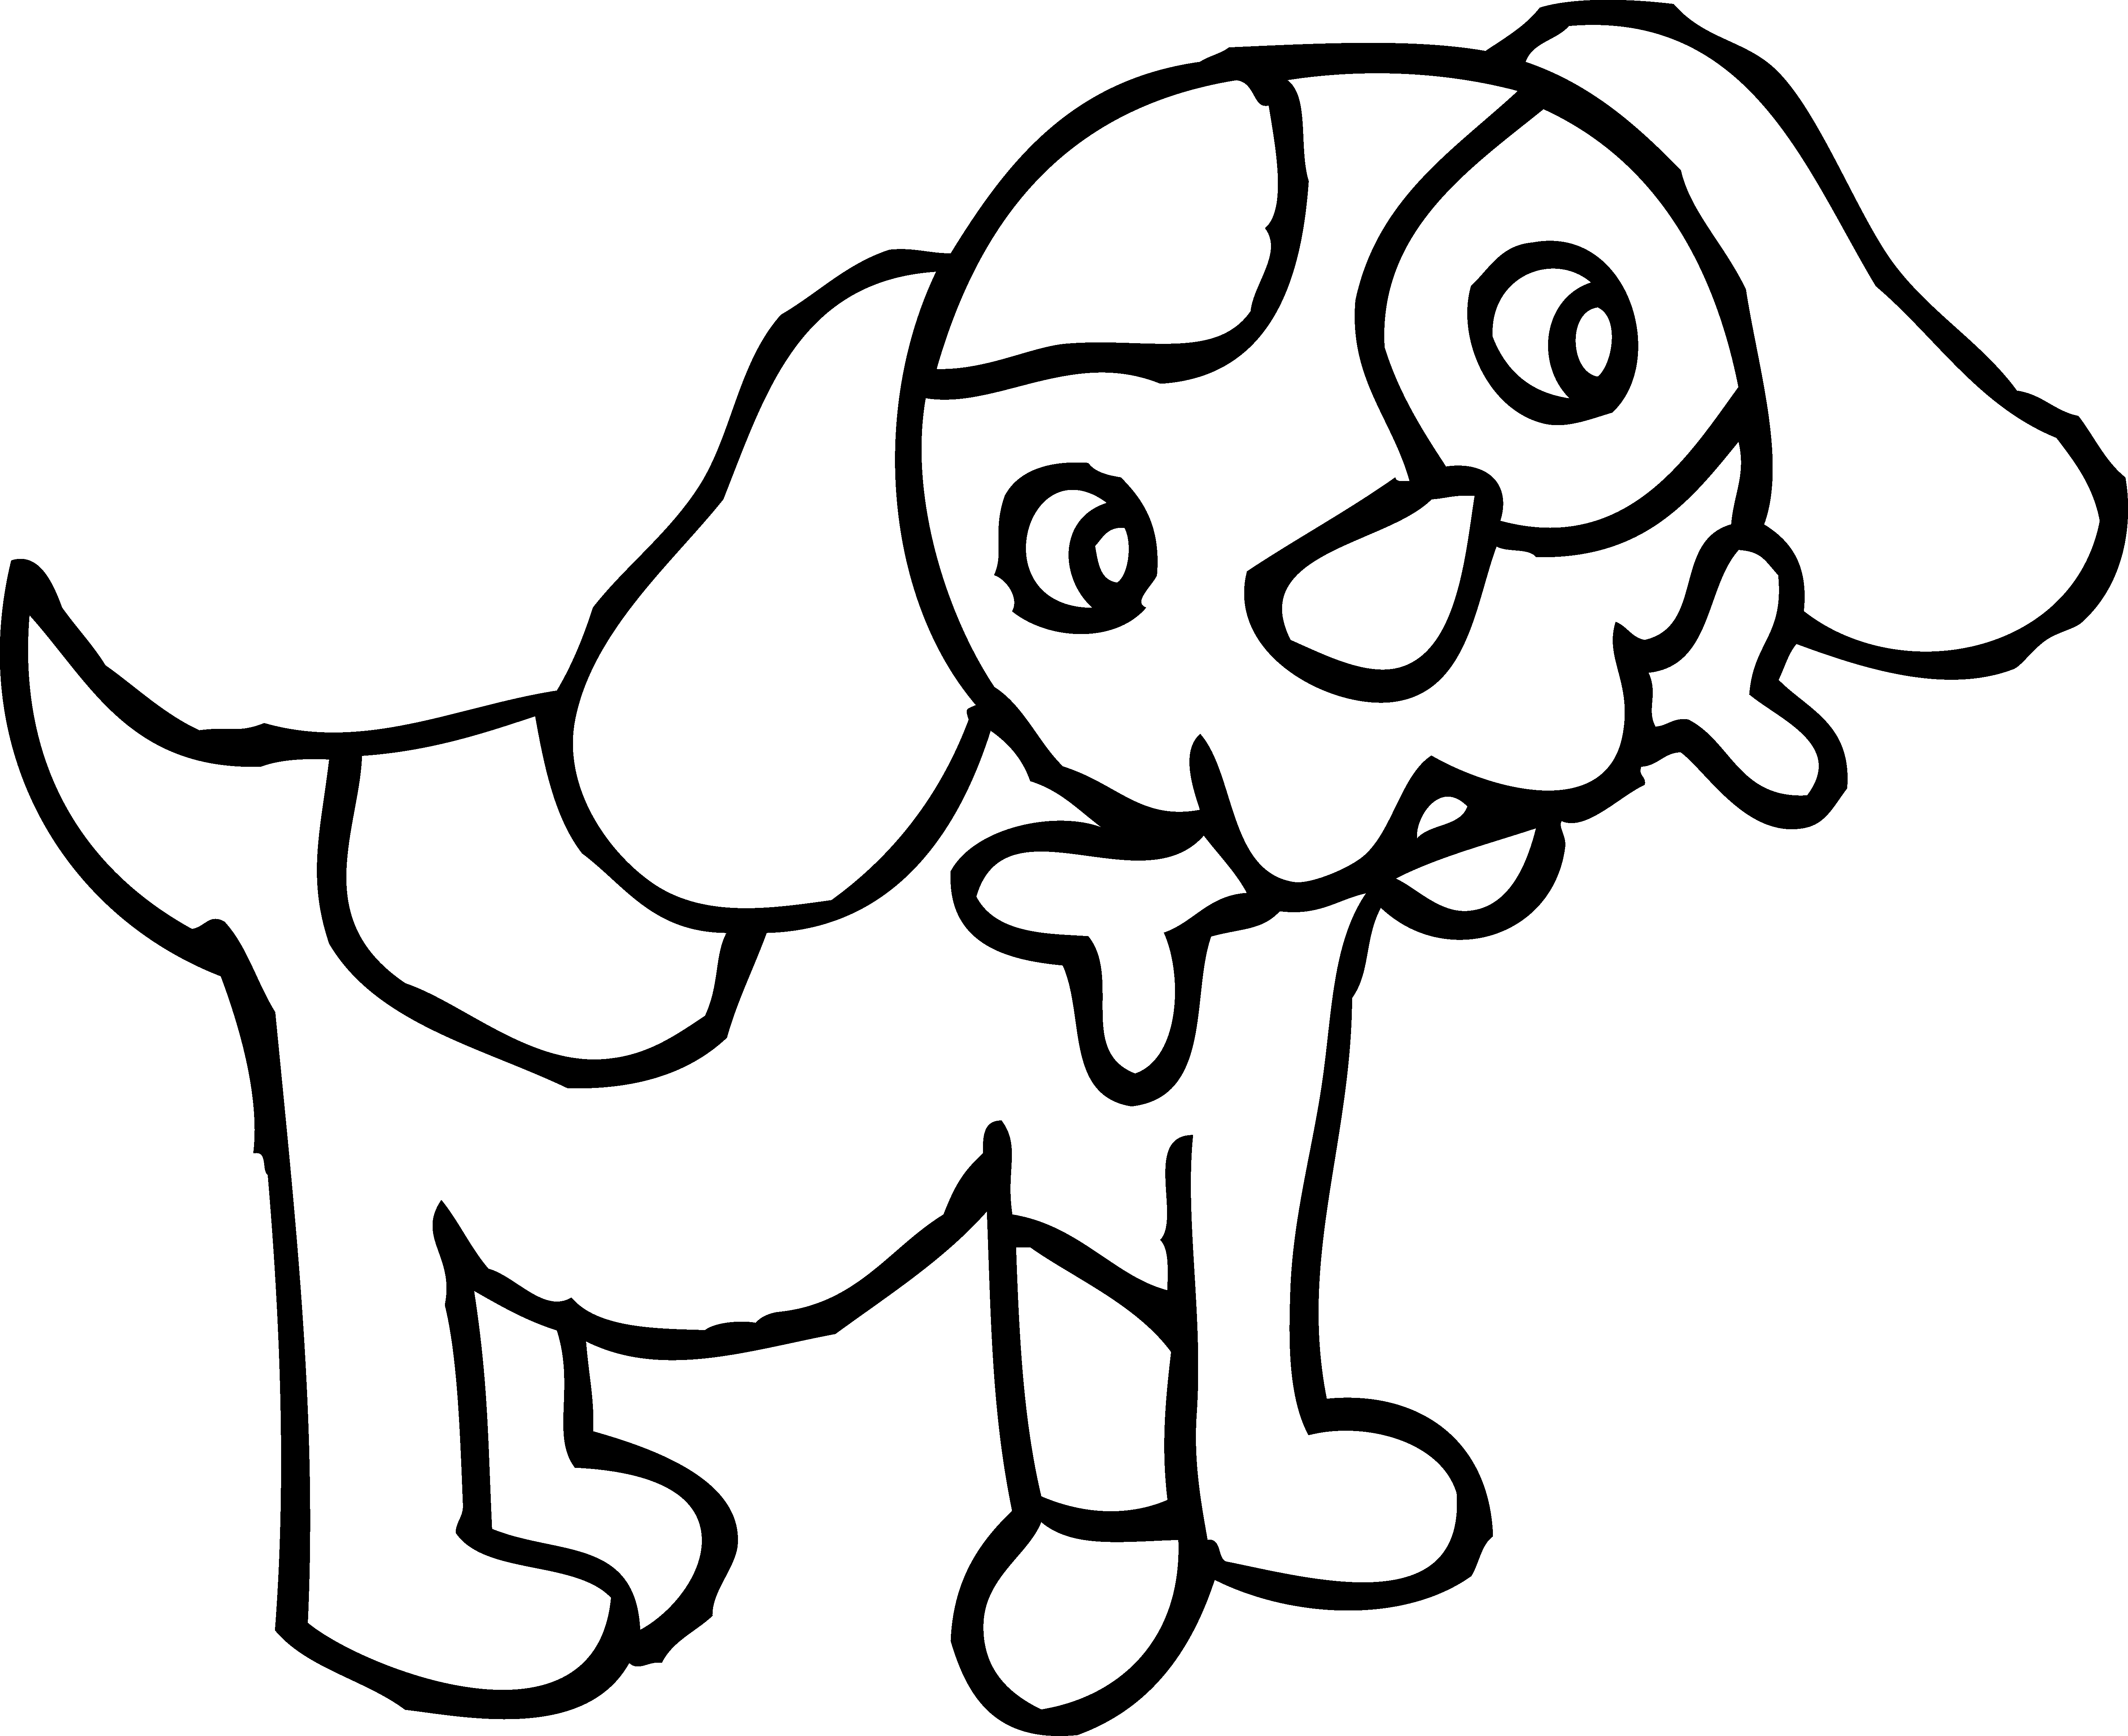 Coloring page of with. Death clipart dog